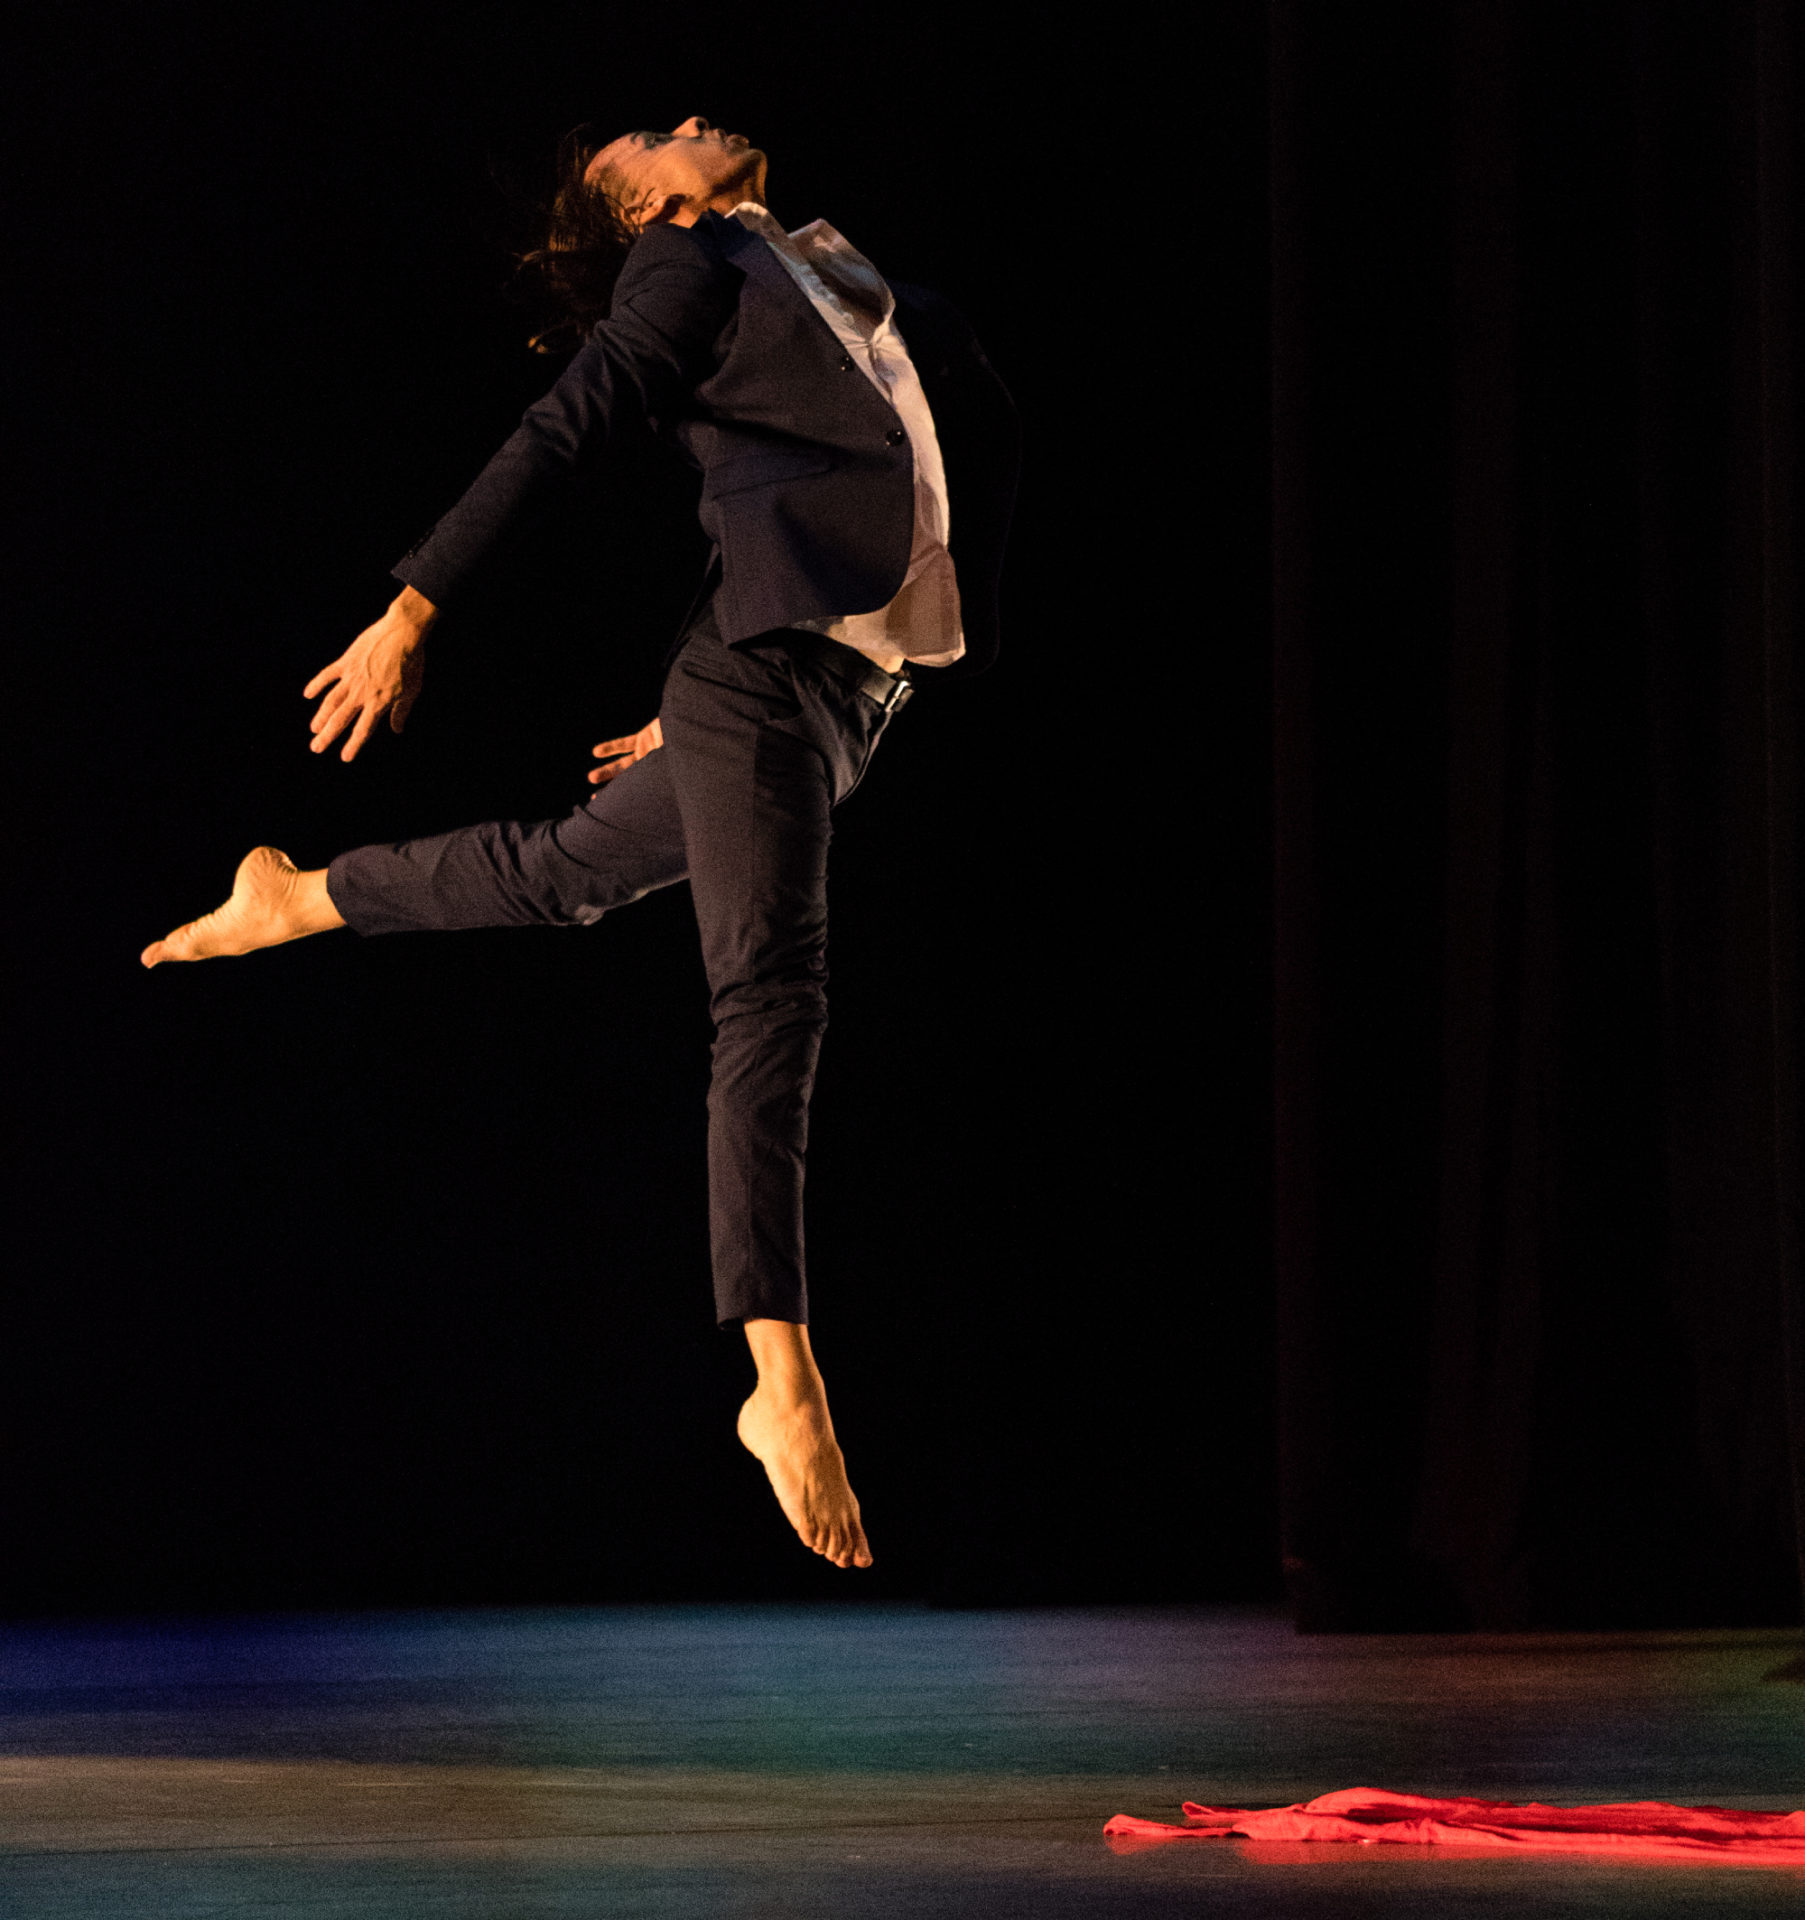 A Black man dancer is captured mid-jump. His left leg is kicked back and his right leg is straight, but off the ground. His back is arched, arms are back, and head is tilted toward the ceiling. There is red fabric on the stage.